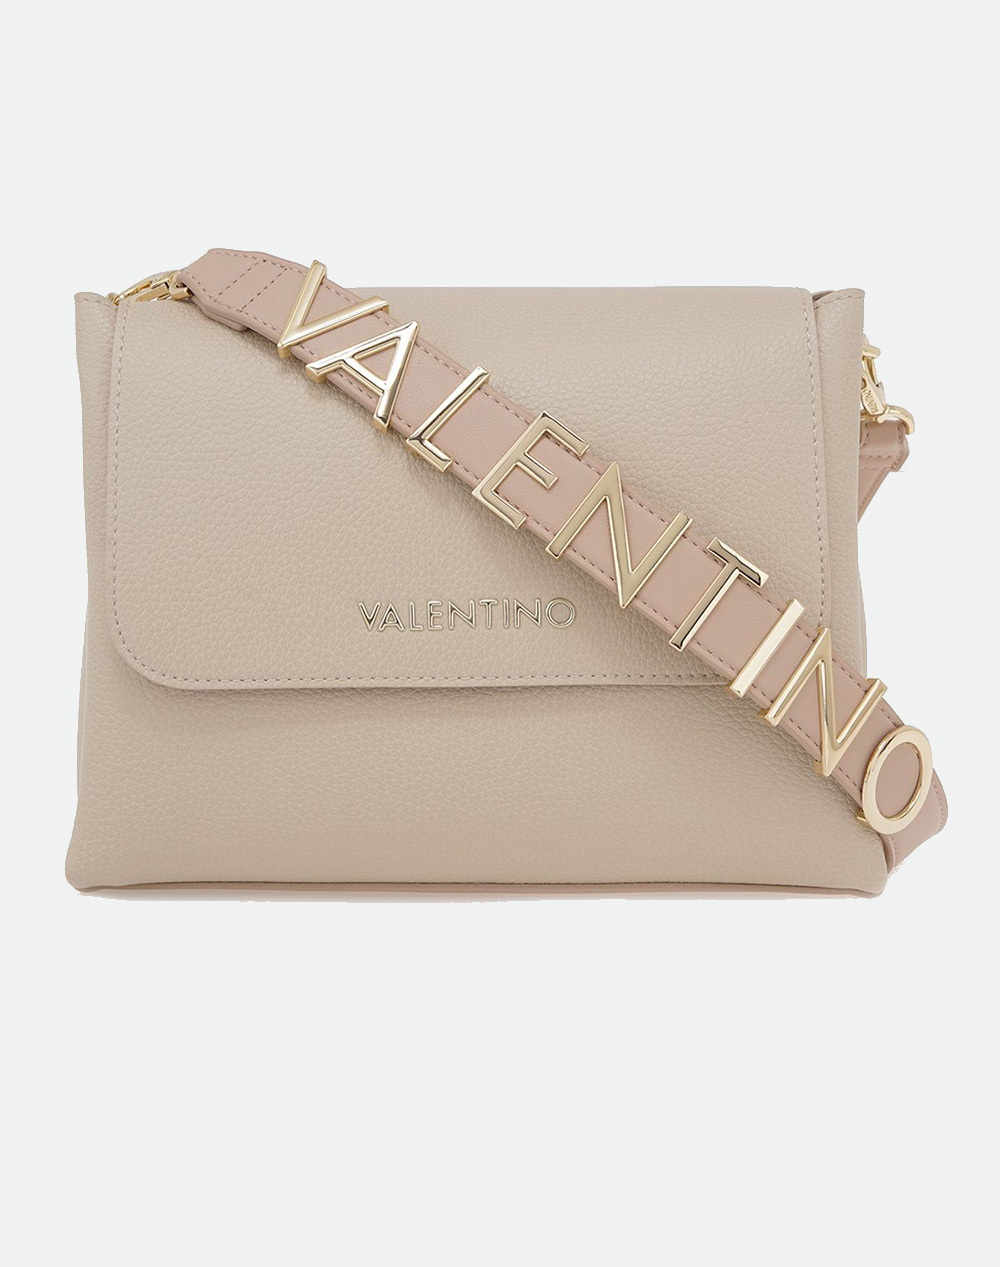 VALENTINO BAGS ΤΣΑΝΤΕΣ ΤΑΧΥΔΡΟΜΟΥ /CROSS BODY (Διαστάσεις: 27 x 20 x15 εκ) S61688039581-581 Biege